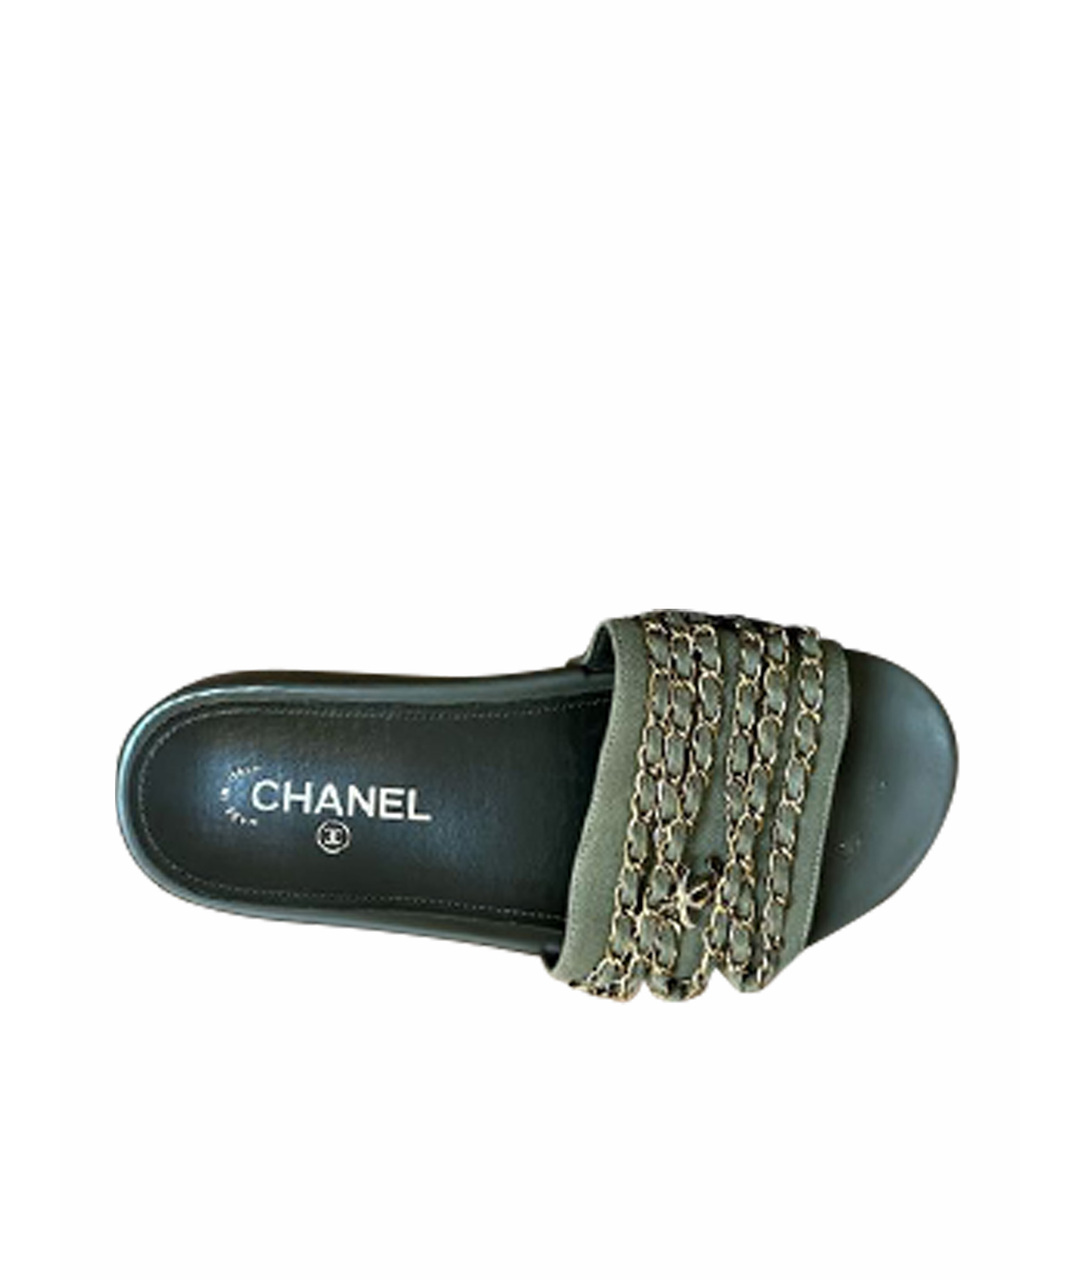 CHANEL PRE-OWNED Хаки кожаные шлепанцы, фото 1